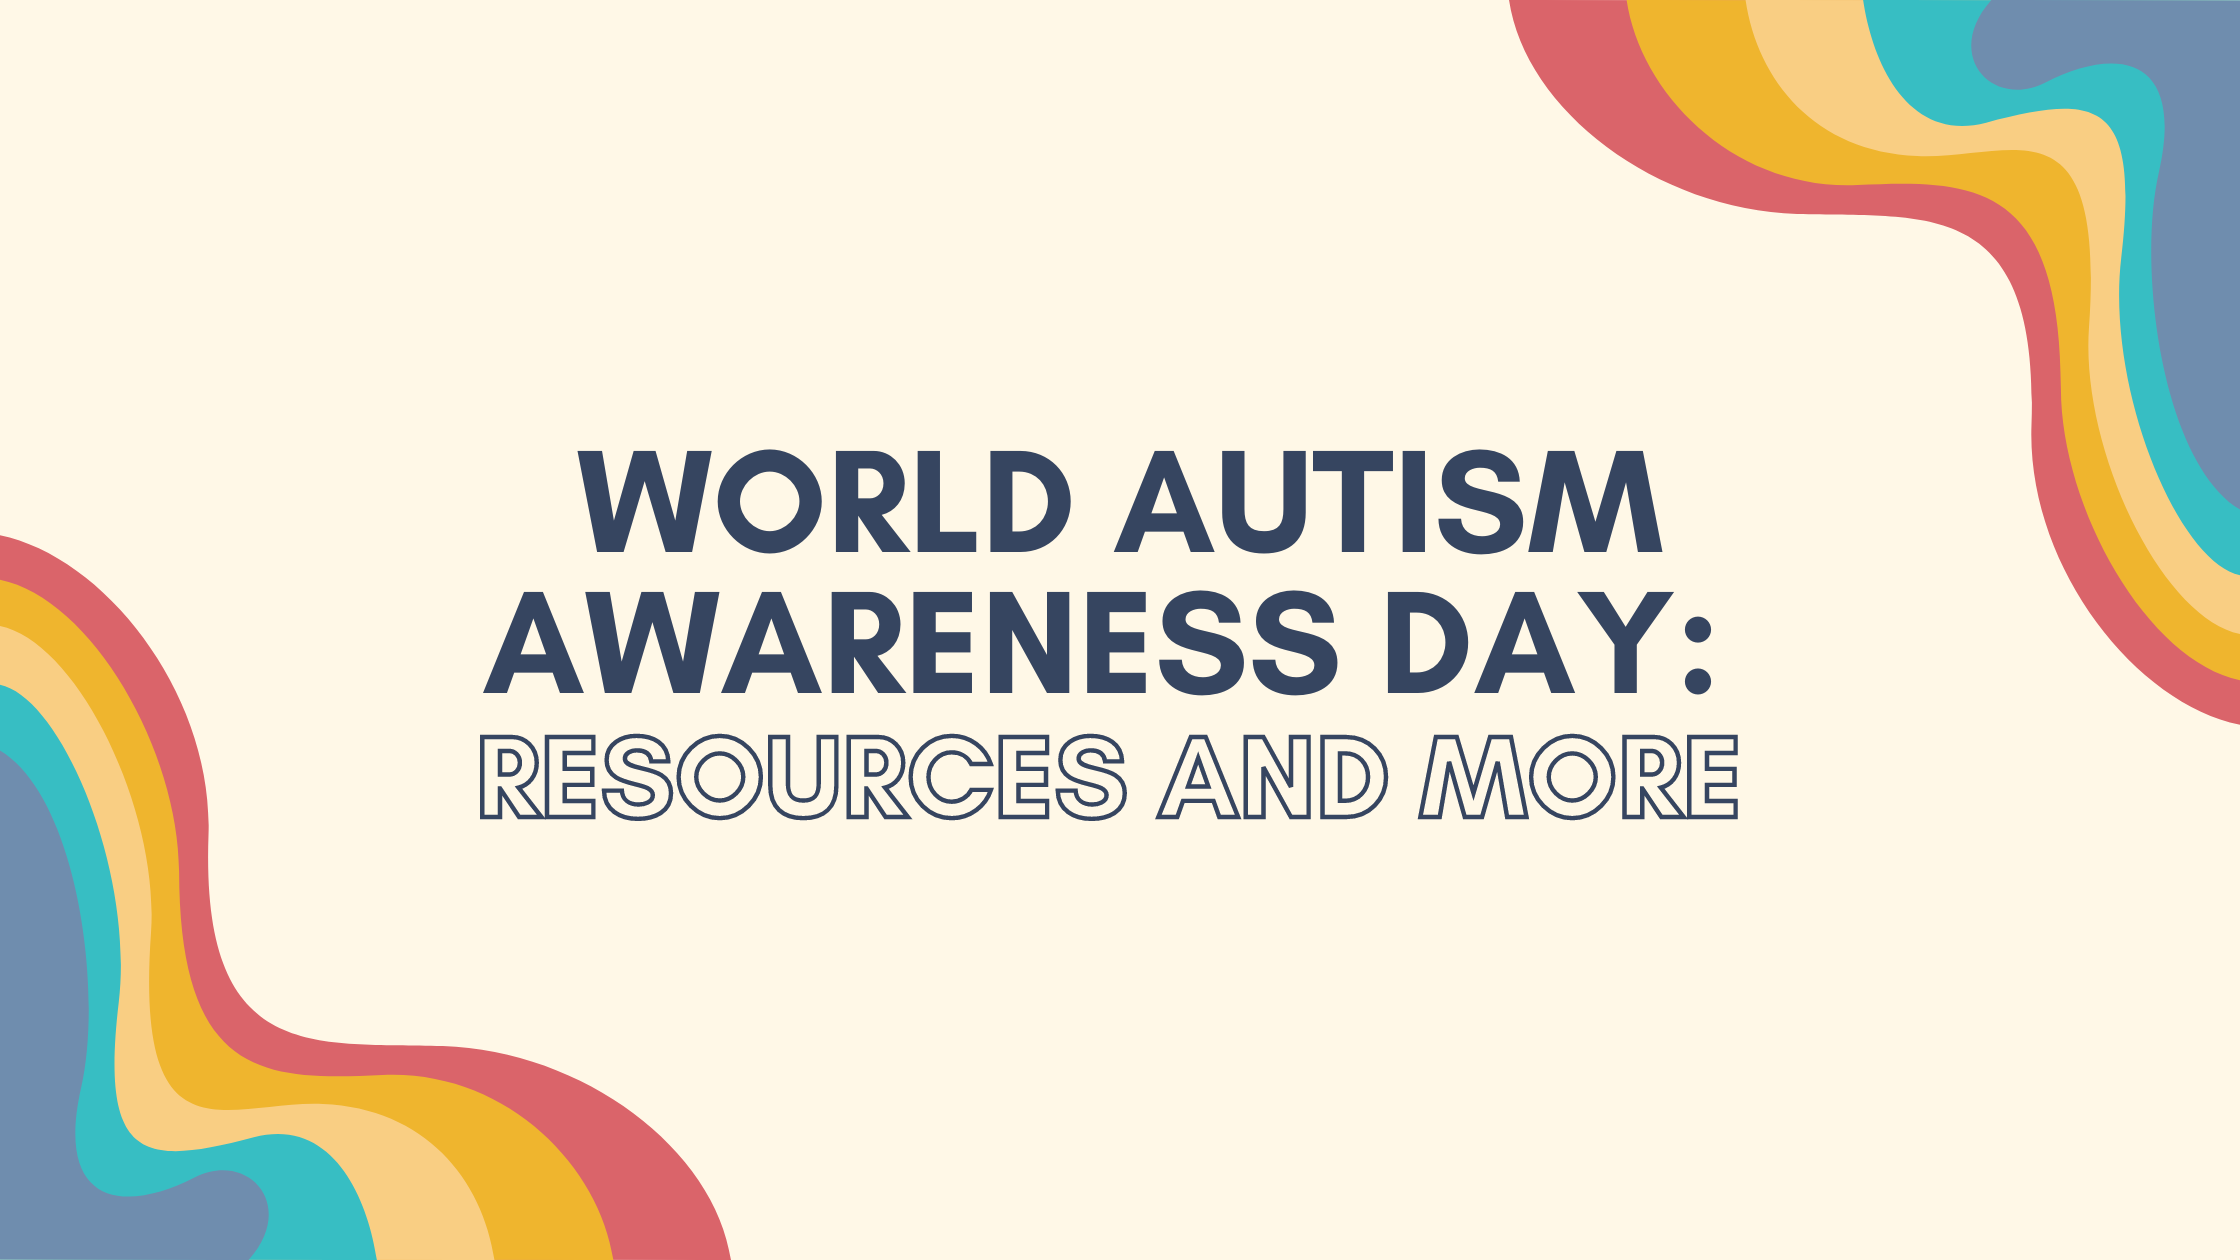 World Autism Awareness Day: Resources and More